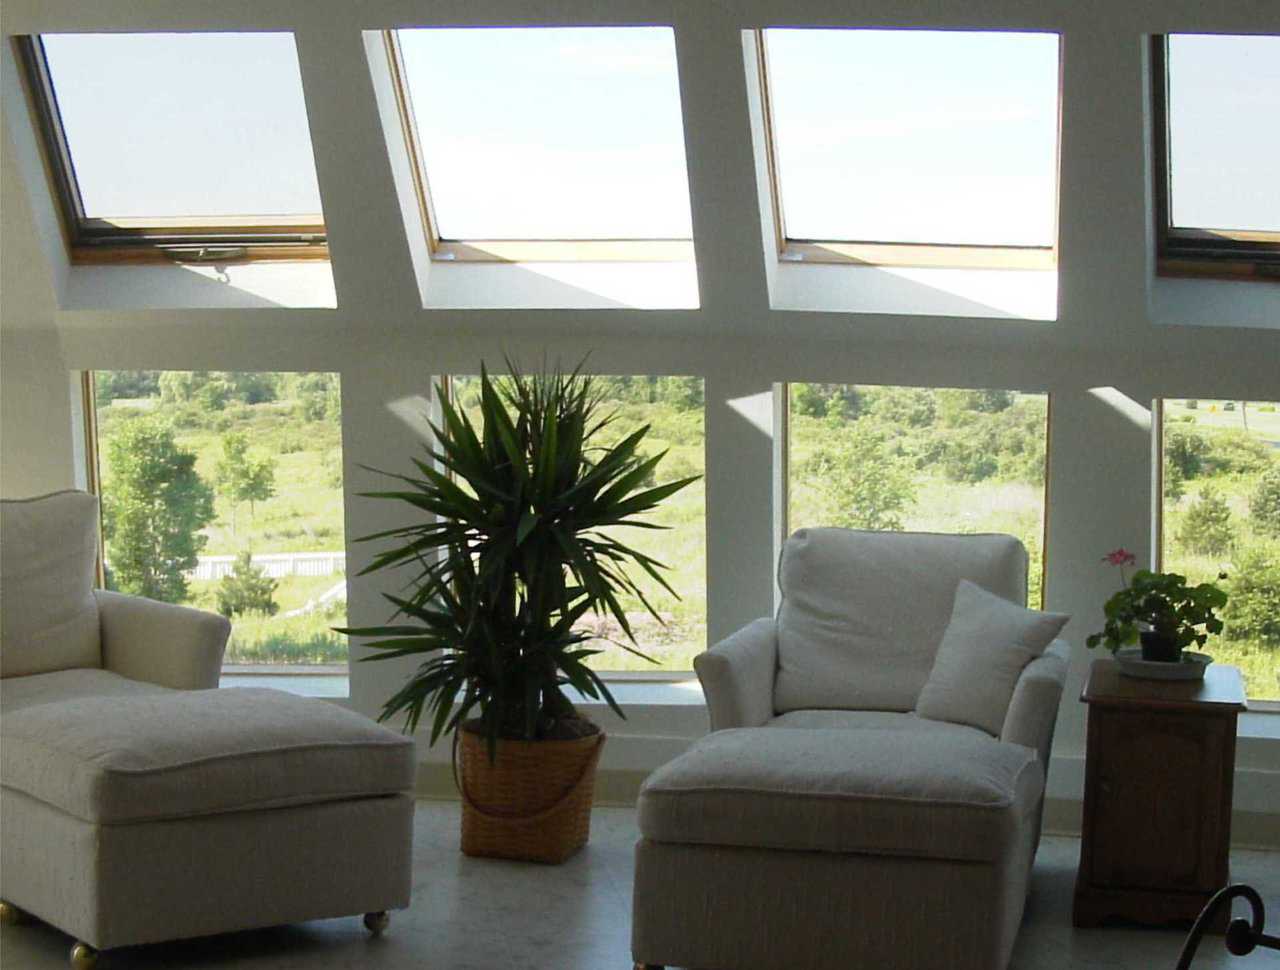 Sitting Area — This third-floor bedroom has a sitting area with a view.